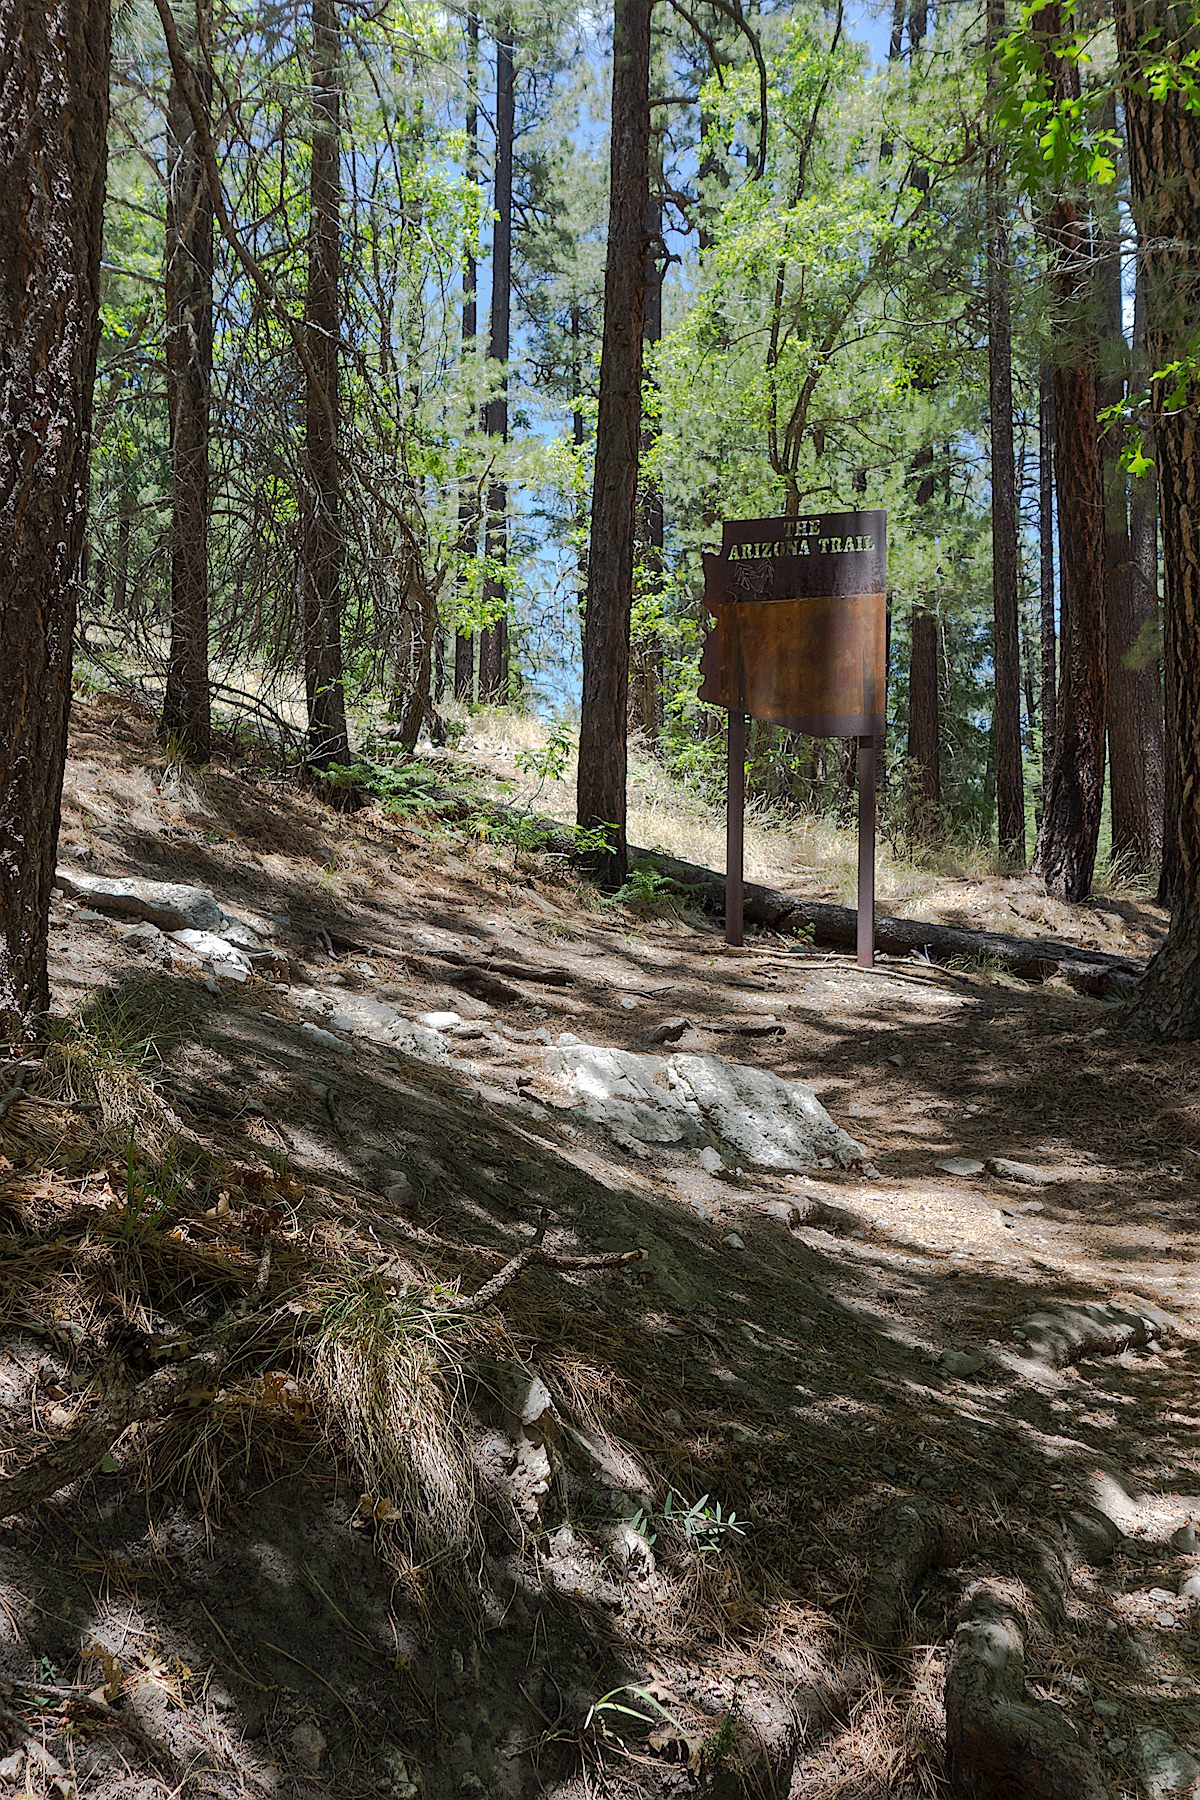 AZ Trail Sign at the start of the Marshall Gulch Trail. June 2014.